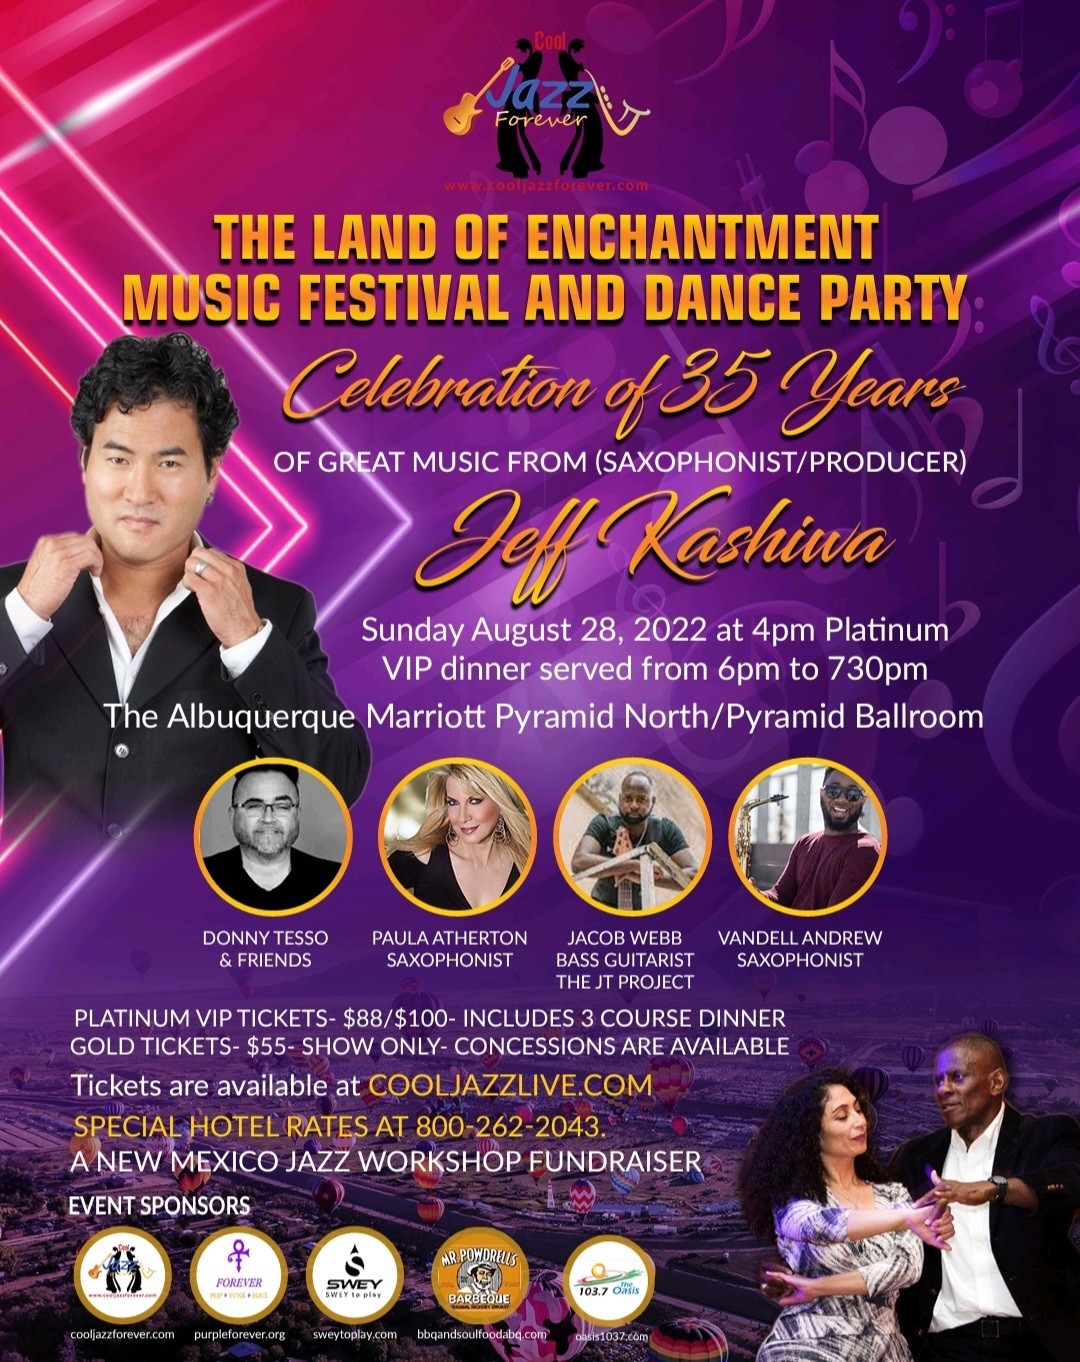 The Land of Enchantment Music Festival in Albuquerque, NM on August 28 – Great Jazz Getaway